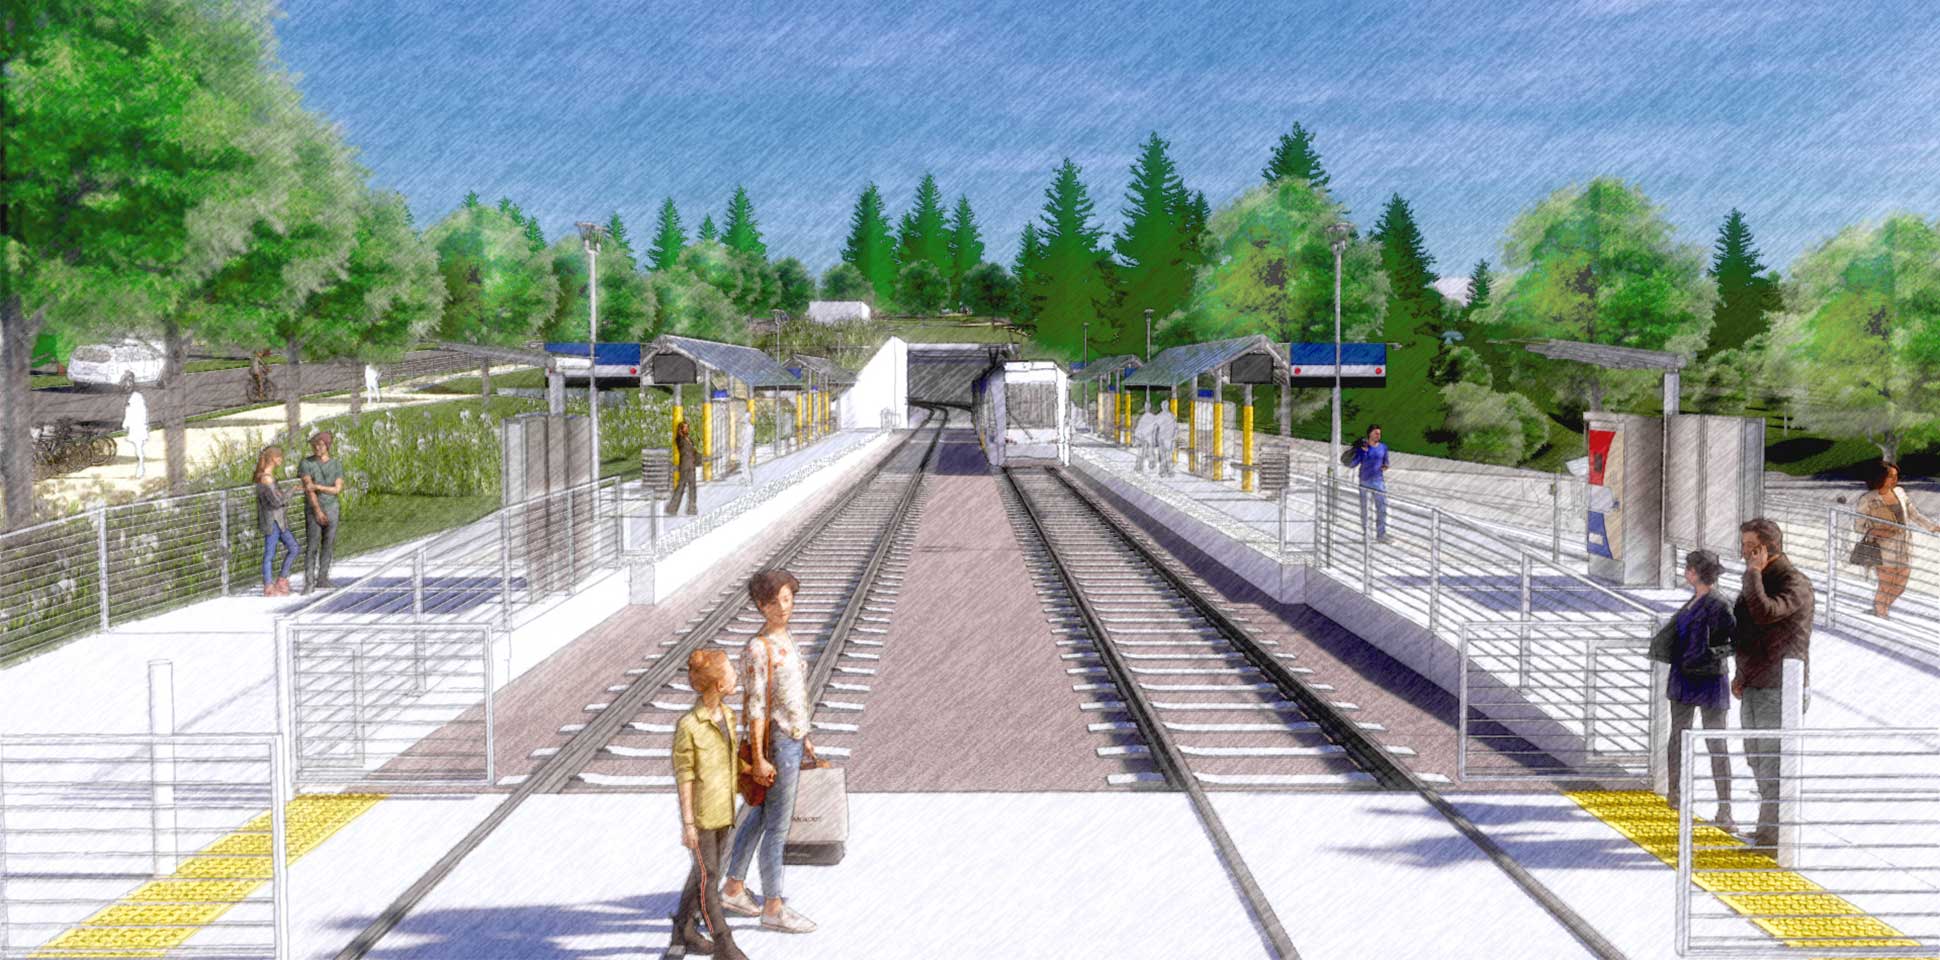 68th Station rendering